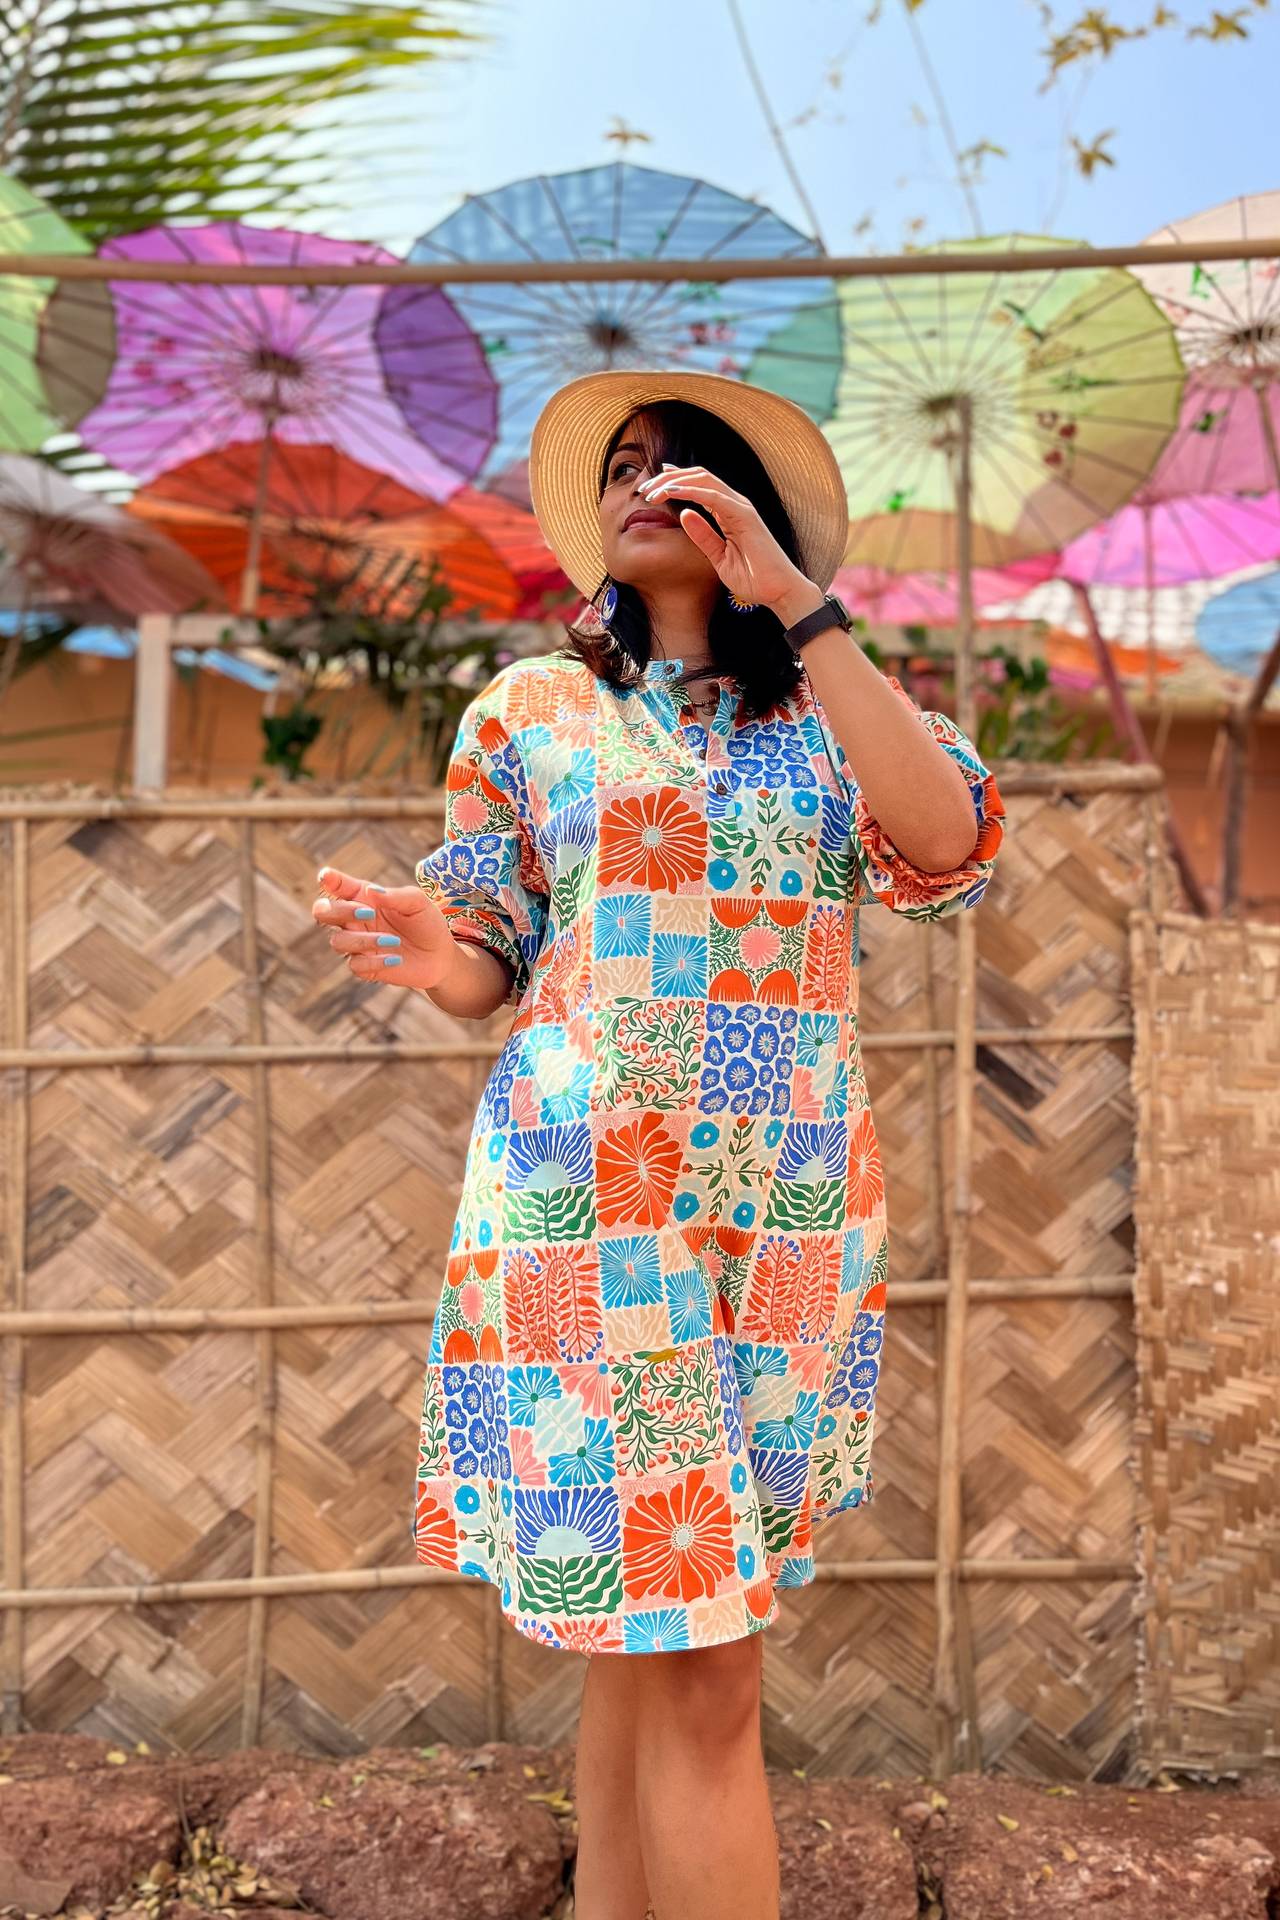 Quirky retro style printed comfy cotton dress for your next vacation